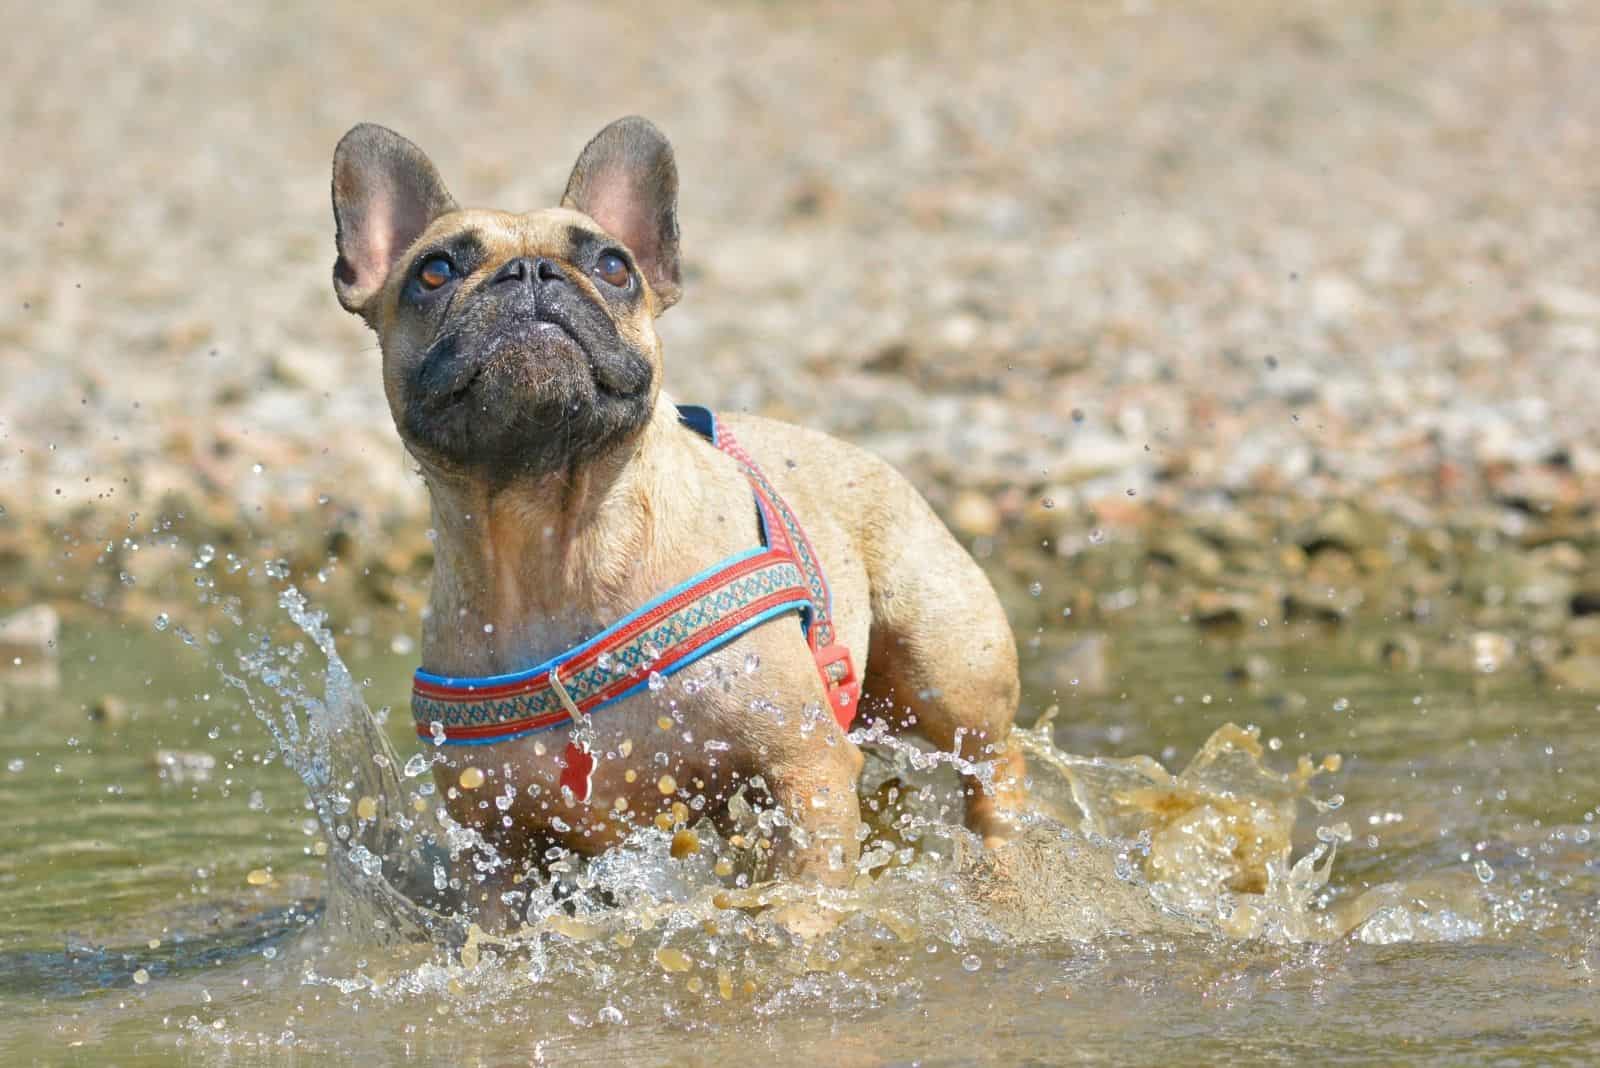 fawn french bulldog playing in the dirty waters outdoors